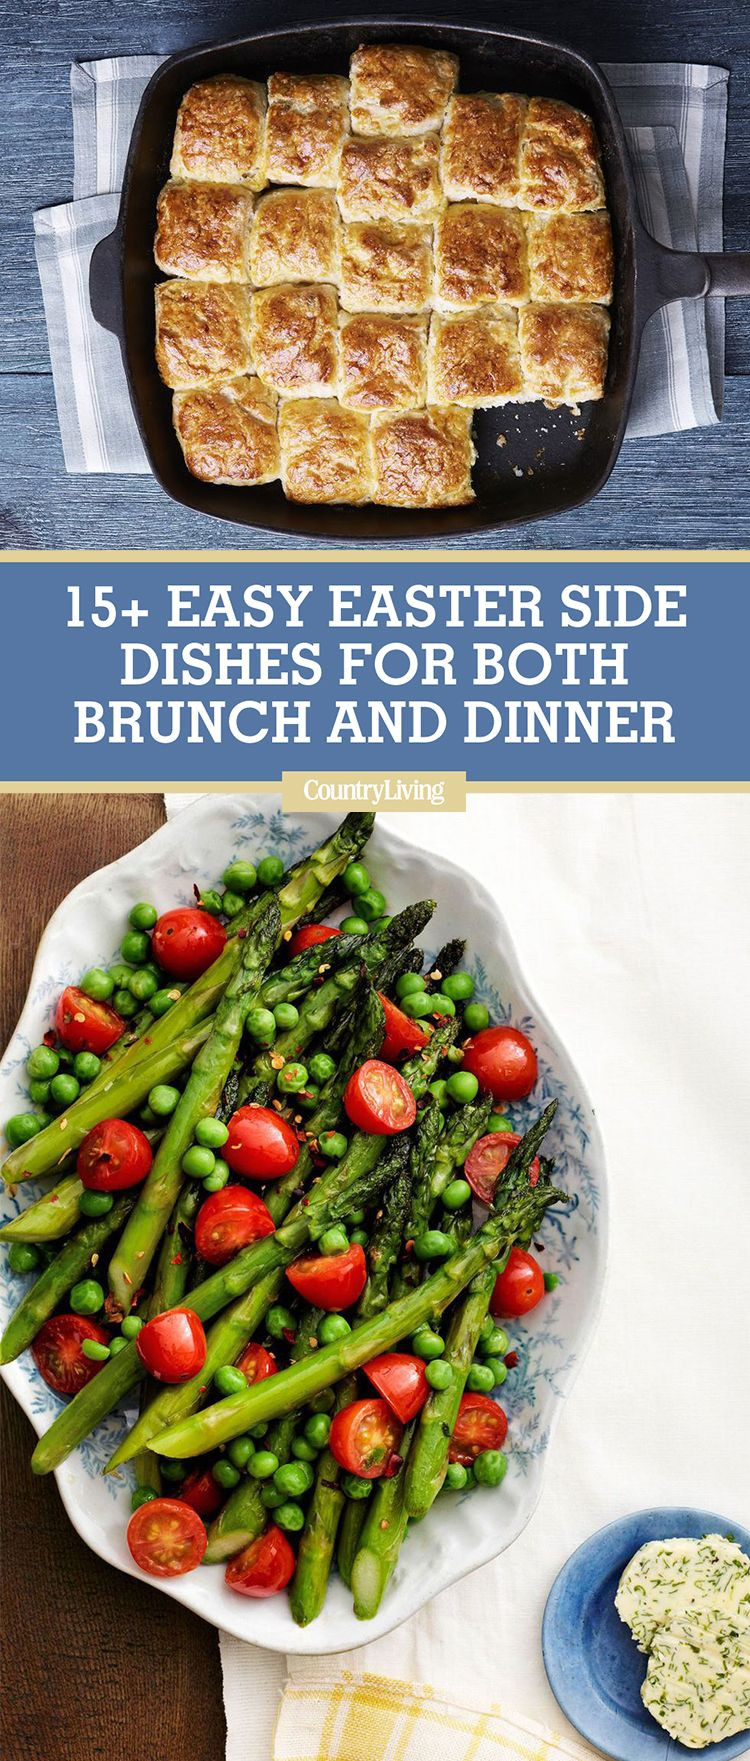 Easter Dinner Side Dishes With Ham
 These Easter Side Dishes Are Bound to Upstage Your Ham